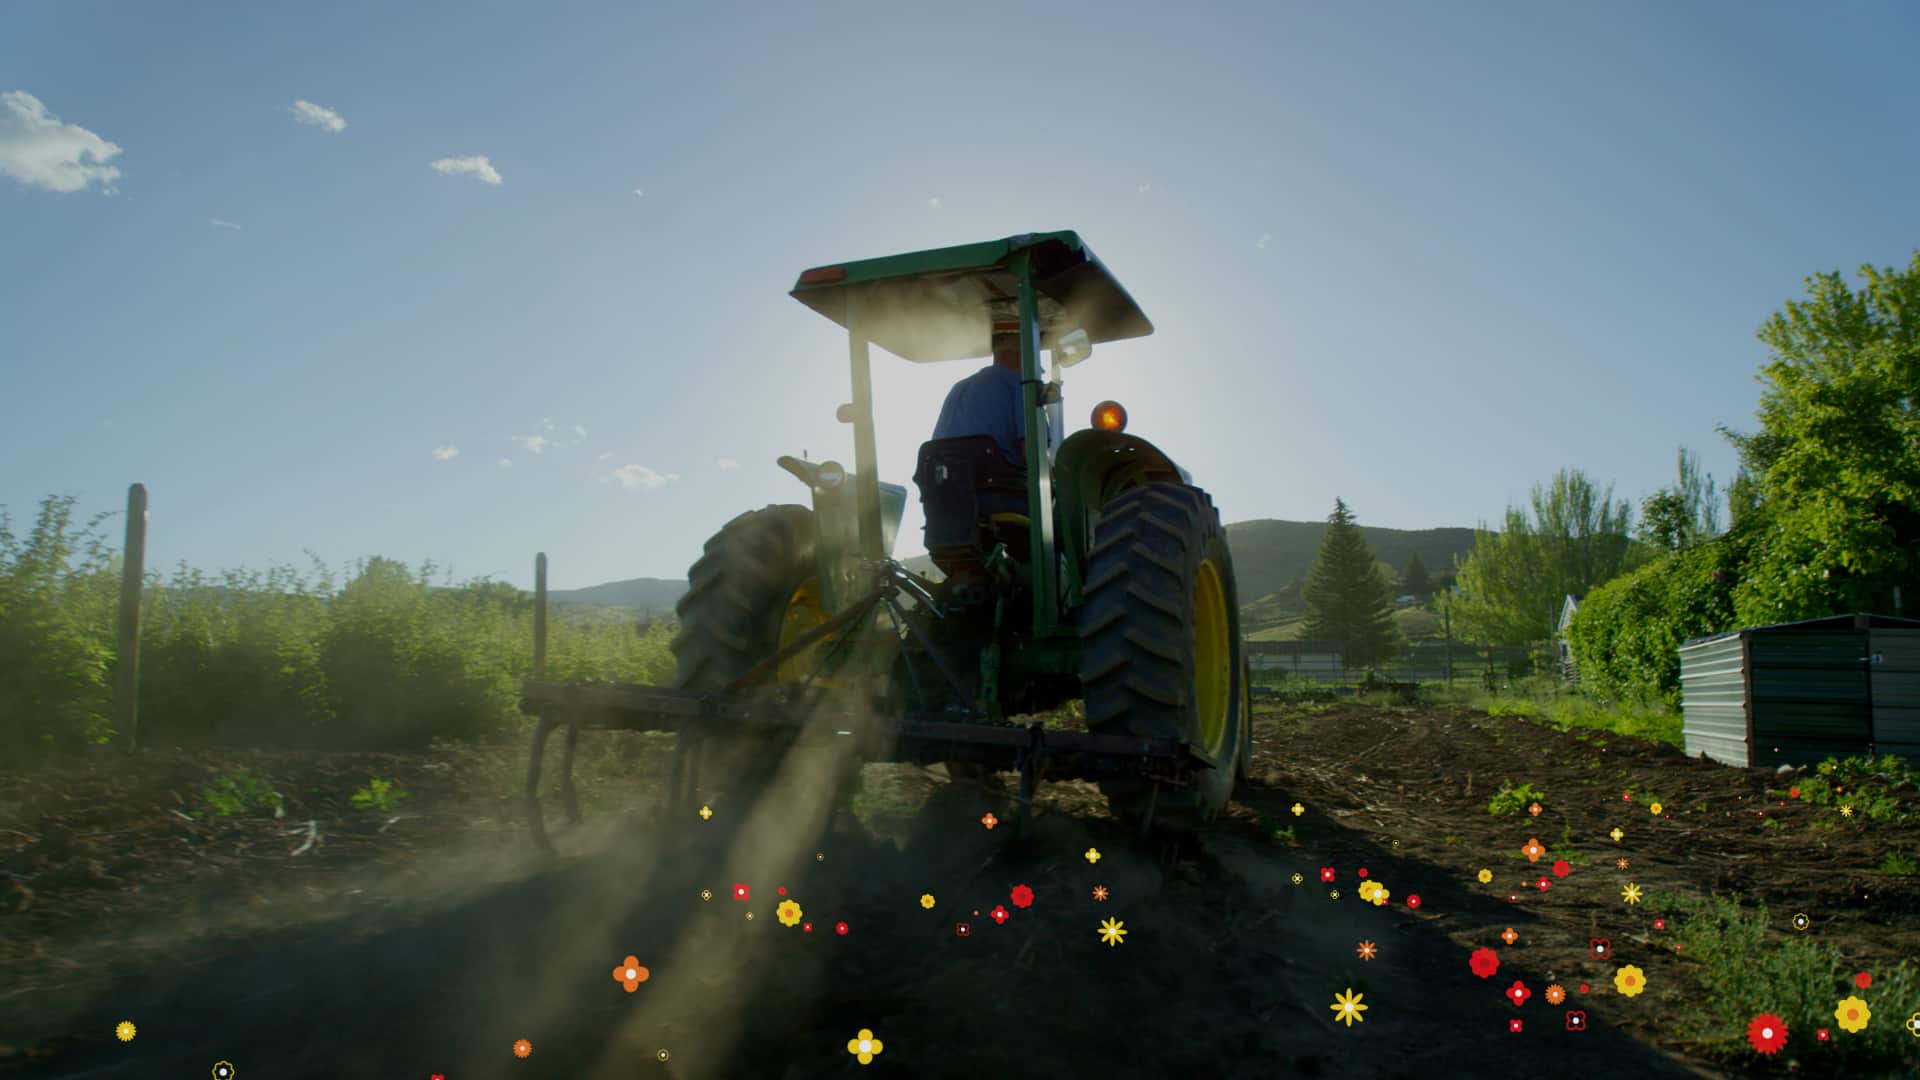 Tractor with animated flowers